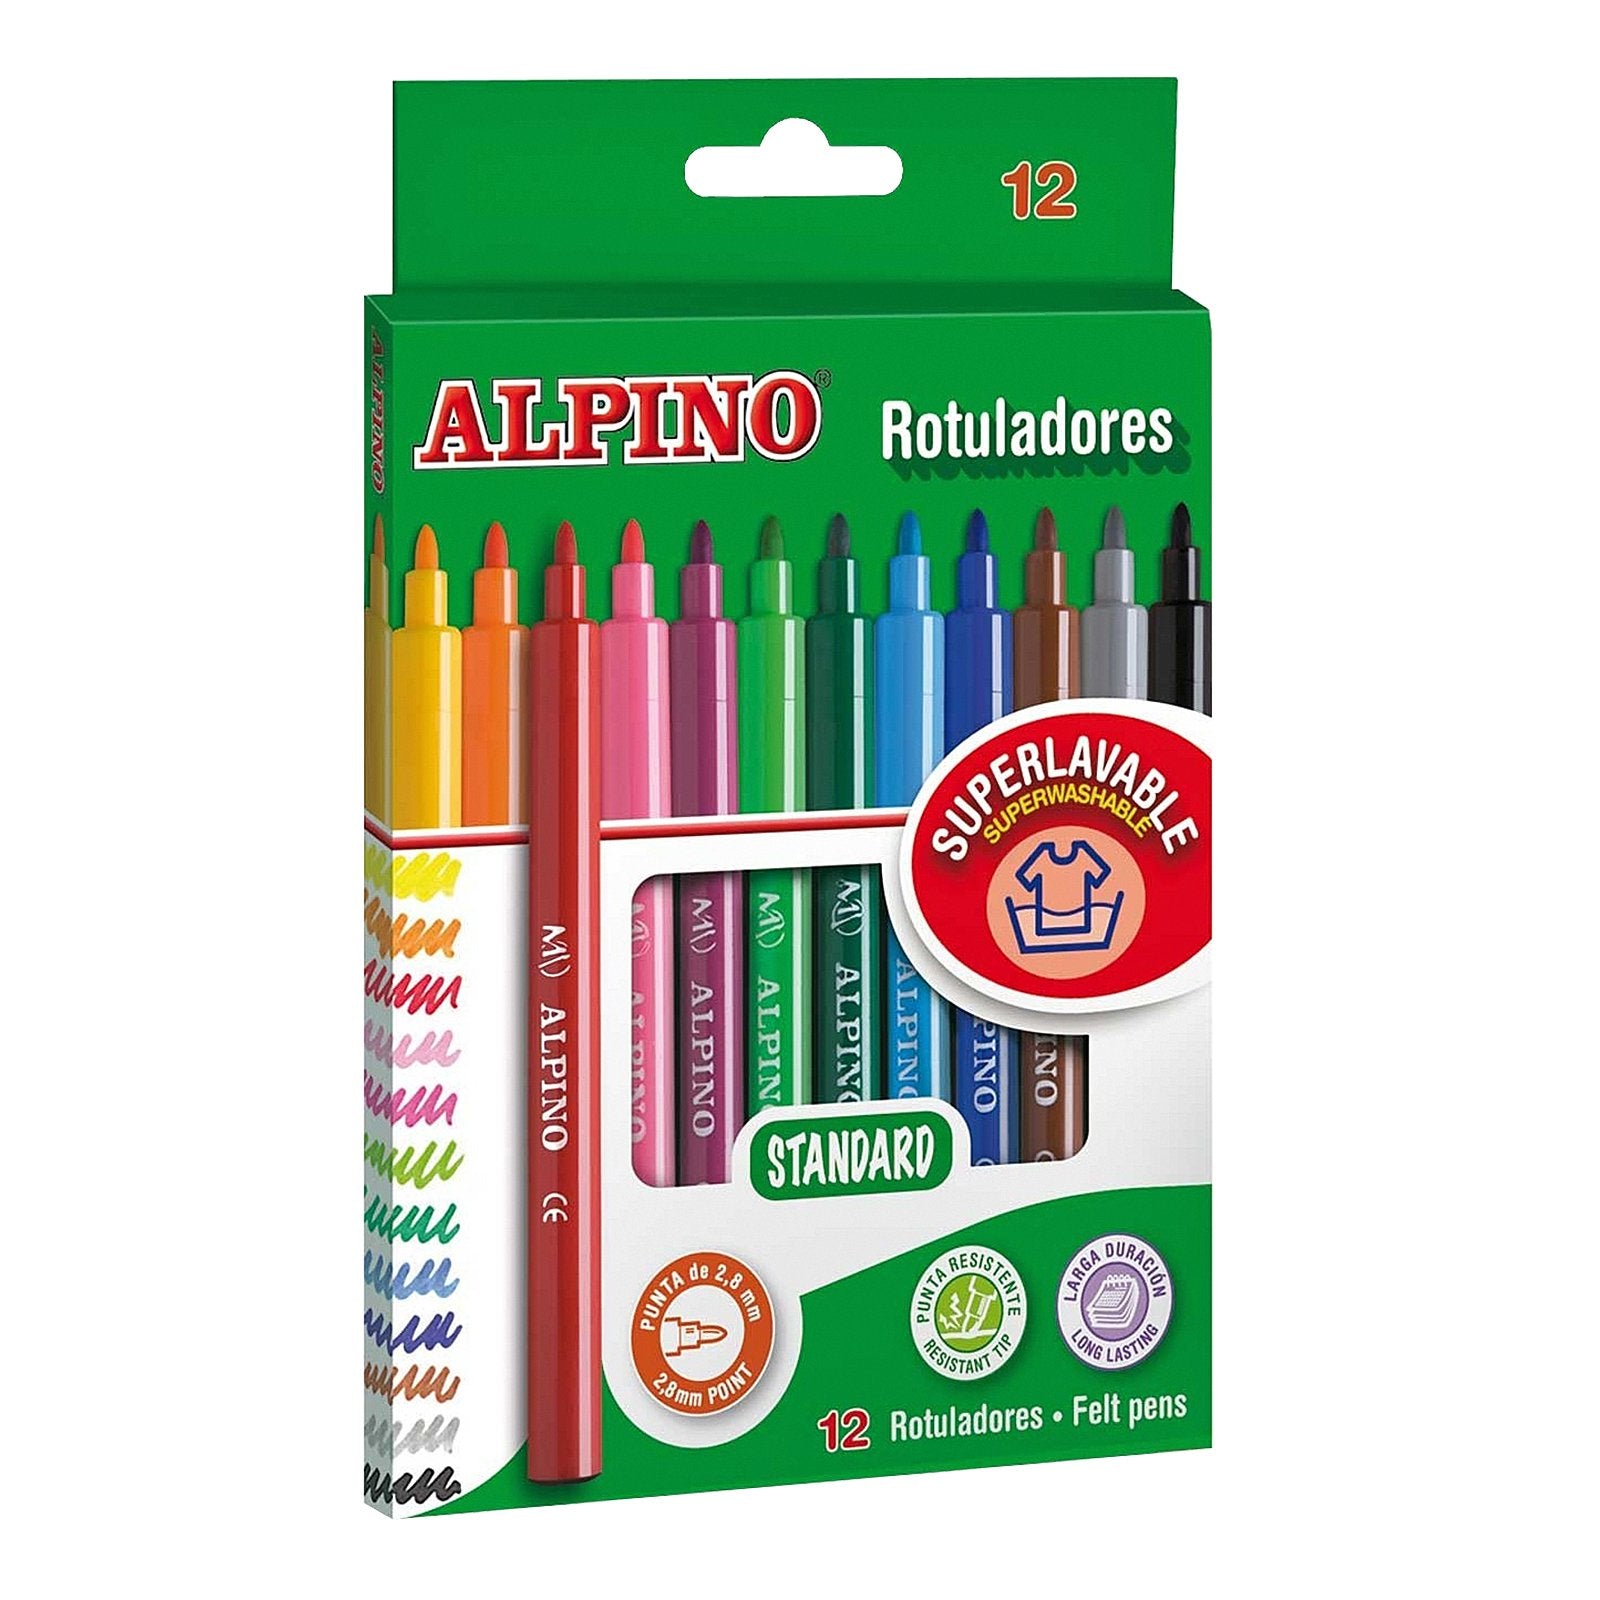 Rotuladores Pastel Q-connect Pack 6 Colores suaves